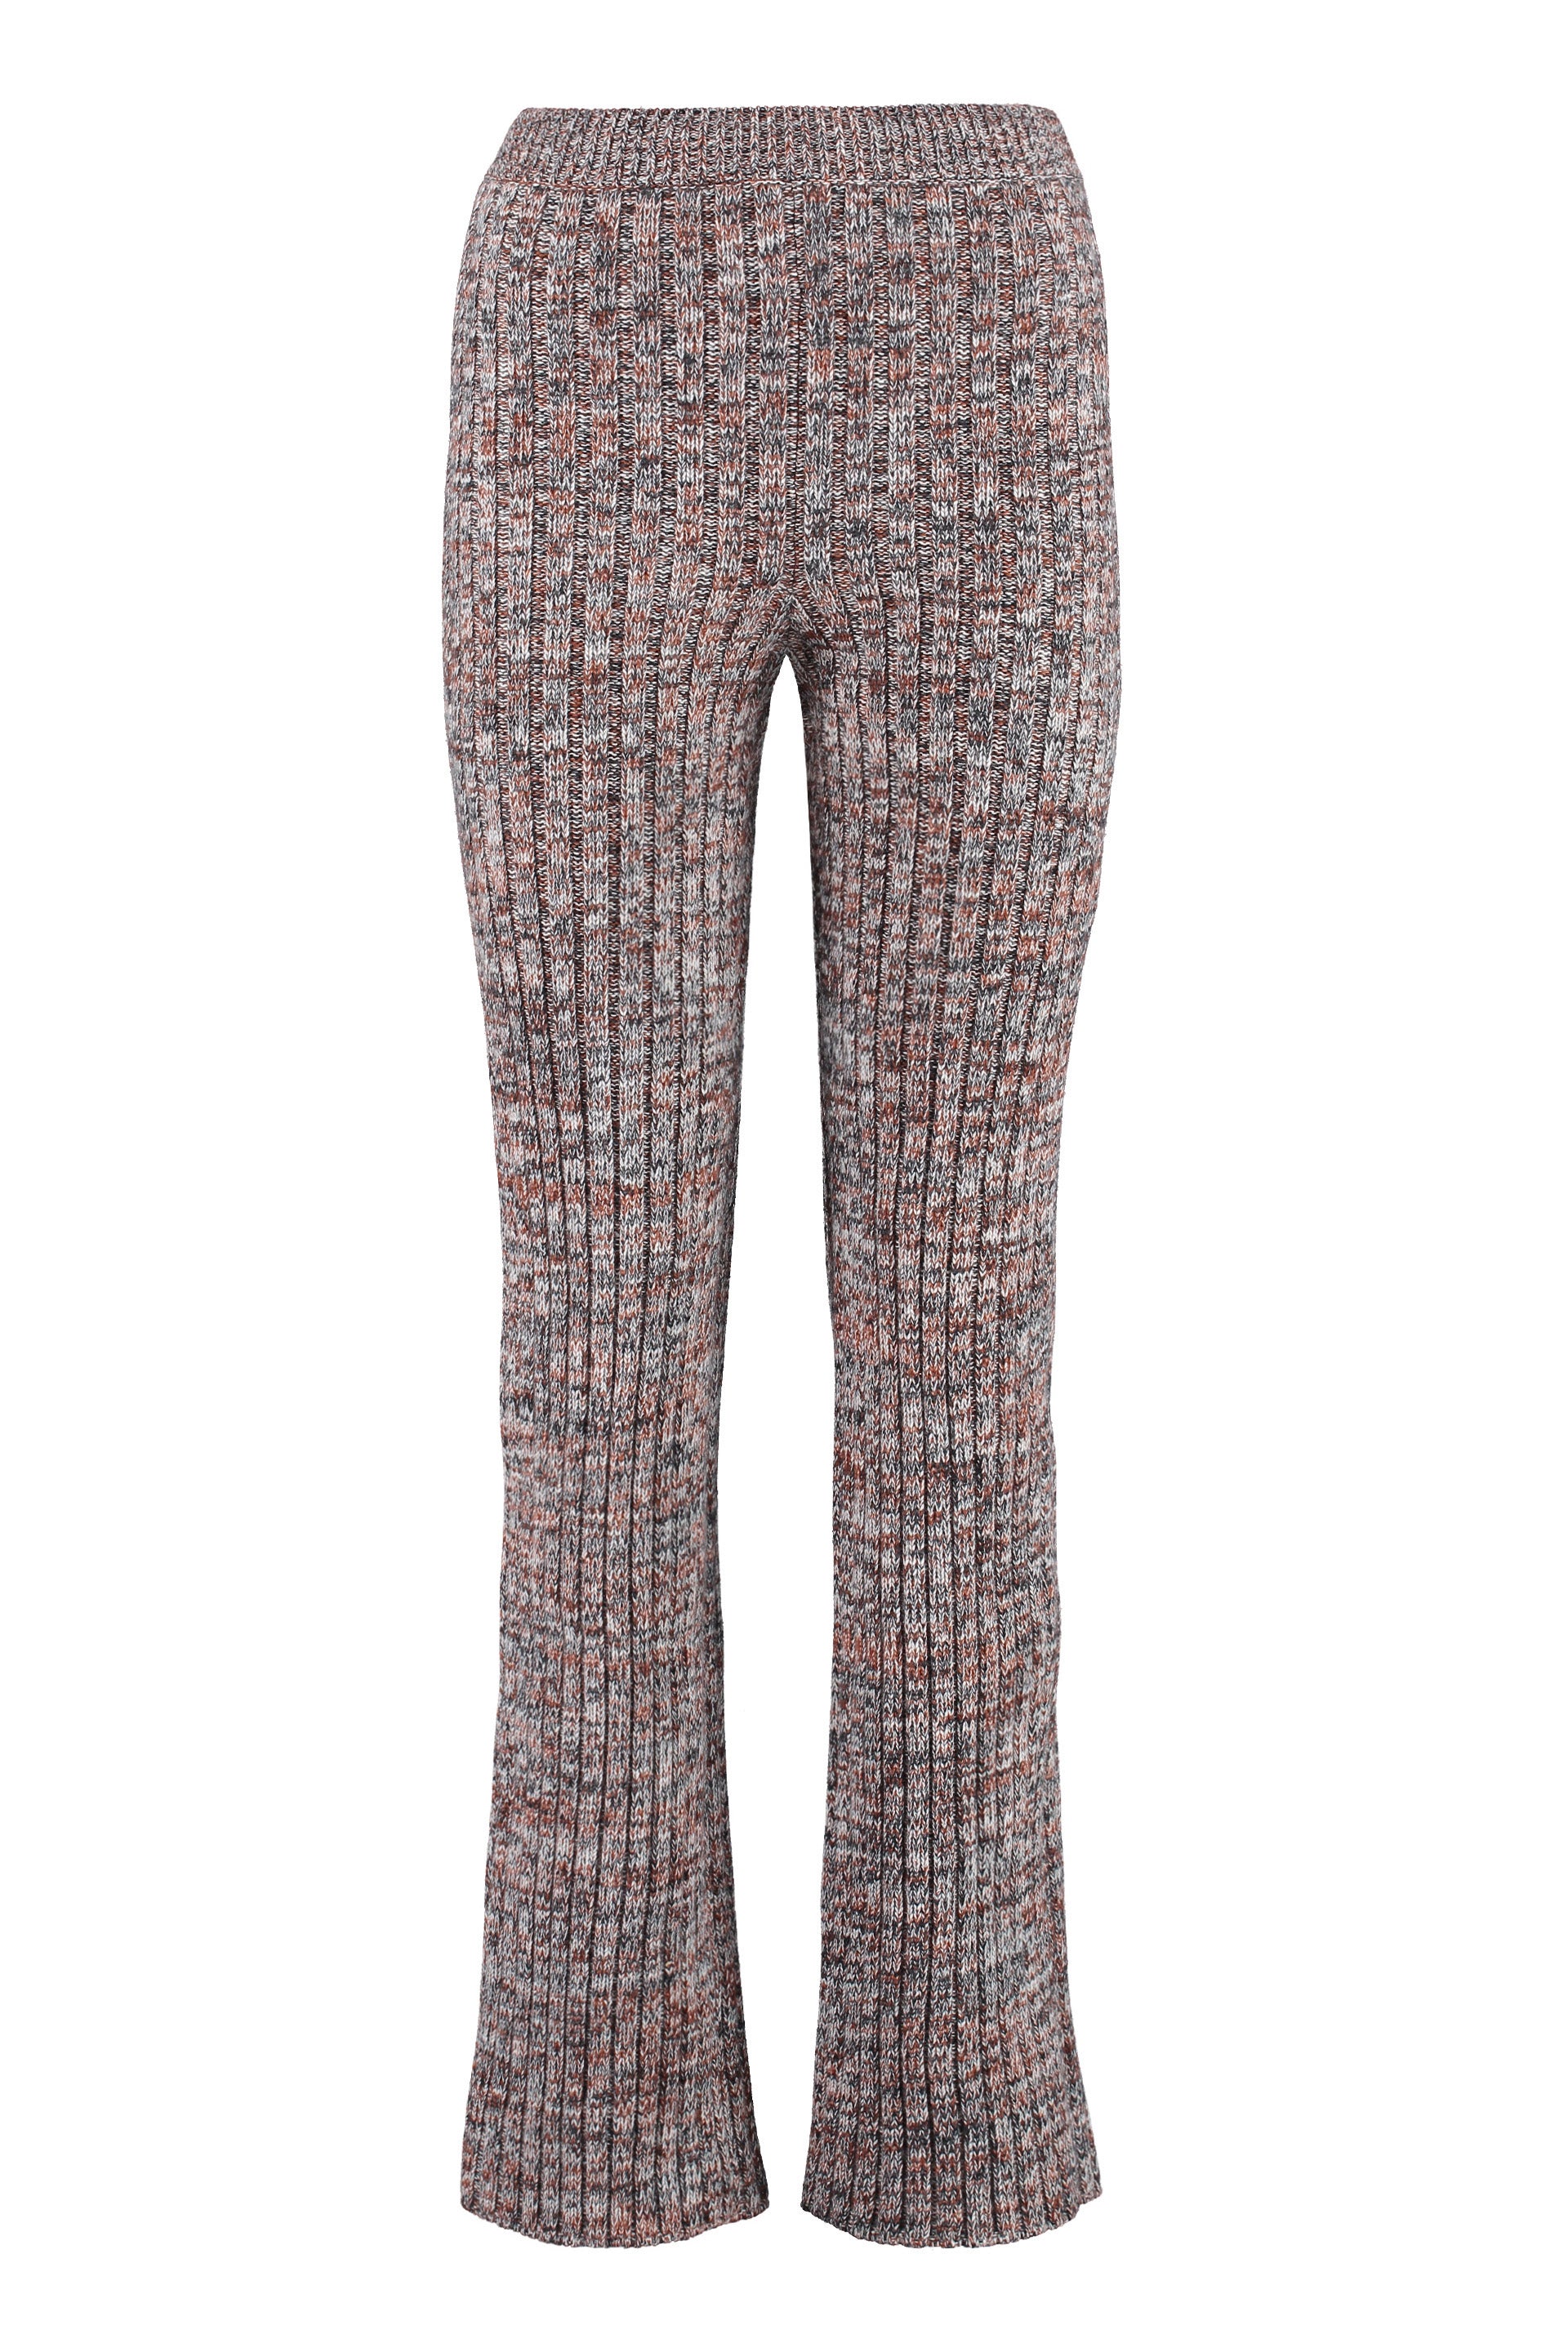 Shop Chloé Multicolor Ribbed Knit Trousers For Women